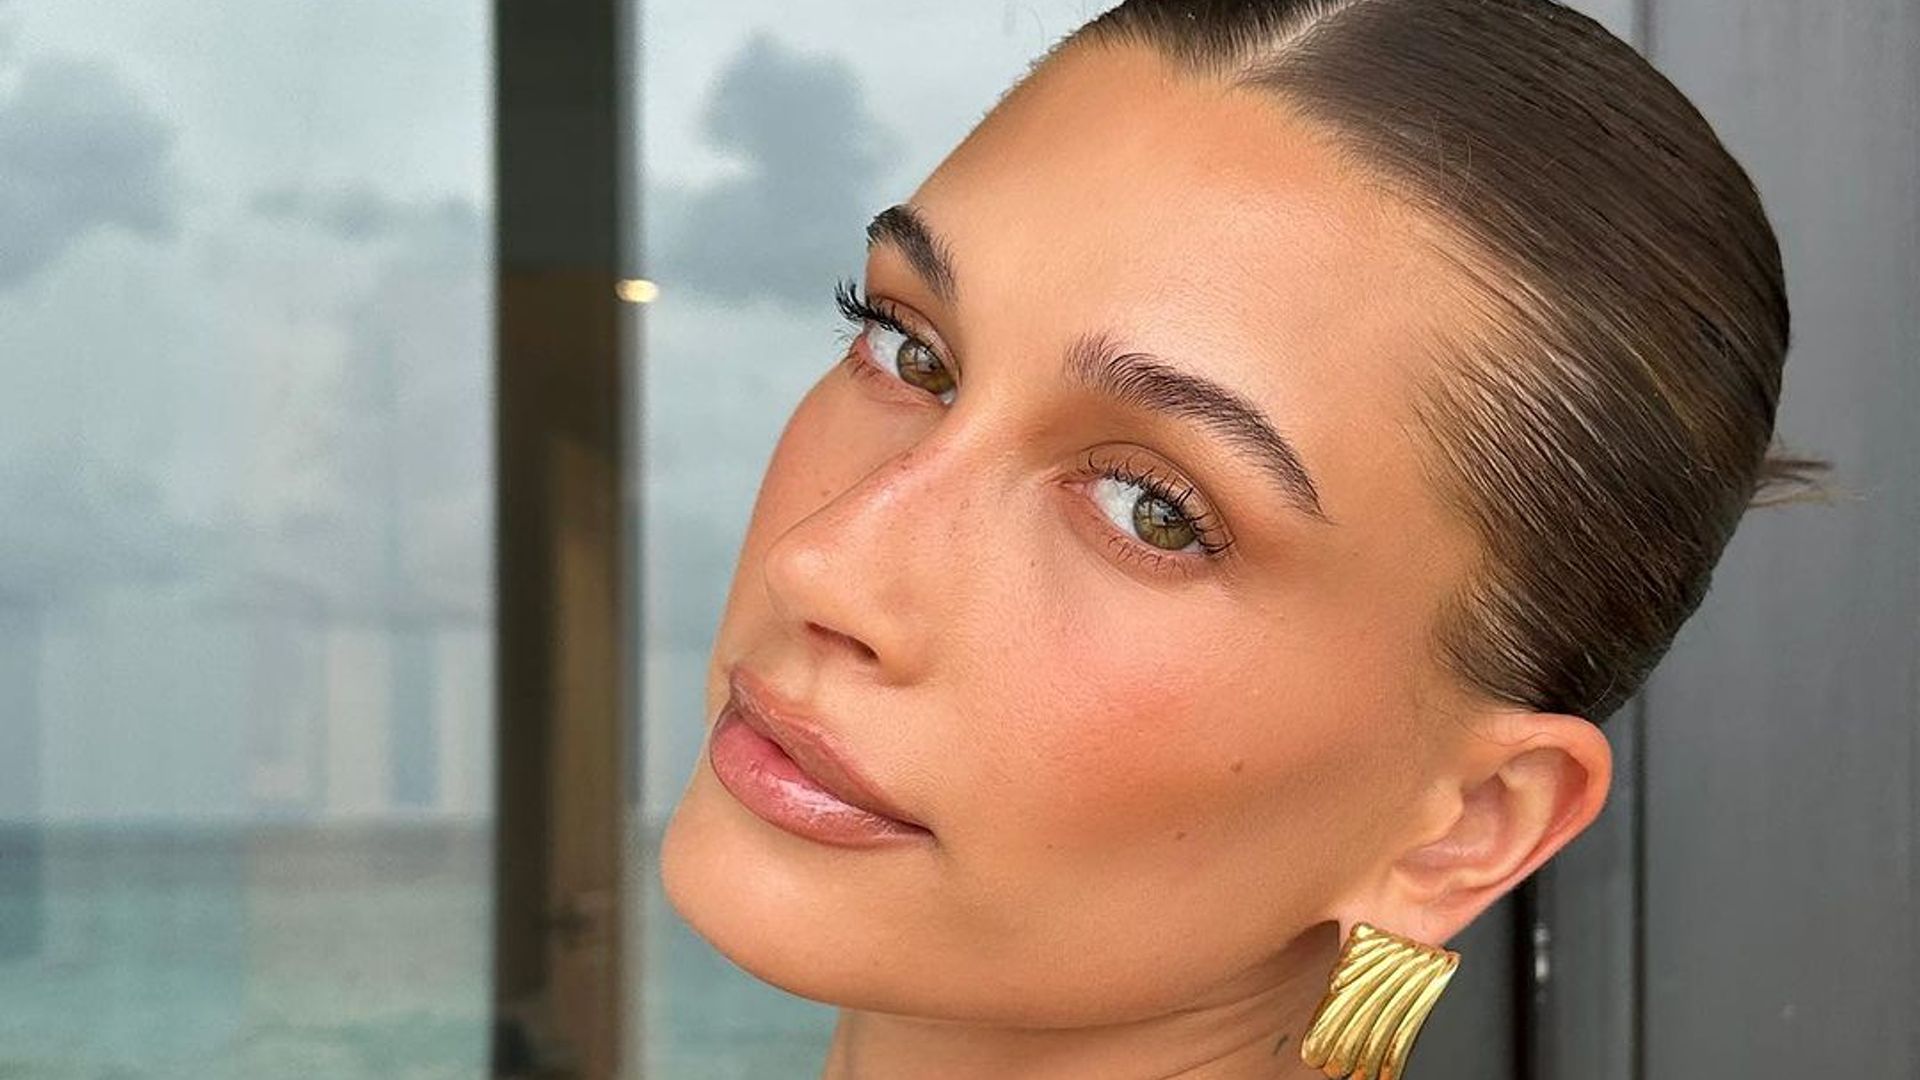 Hailey Bieber looks at camera with her hair up and wearing gold earring